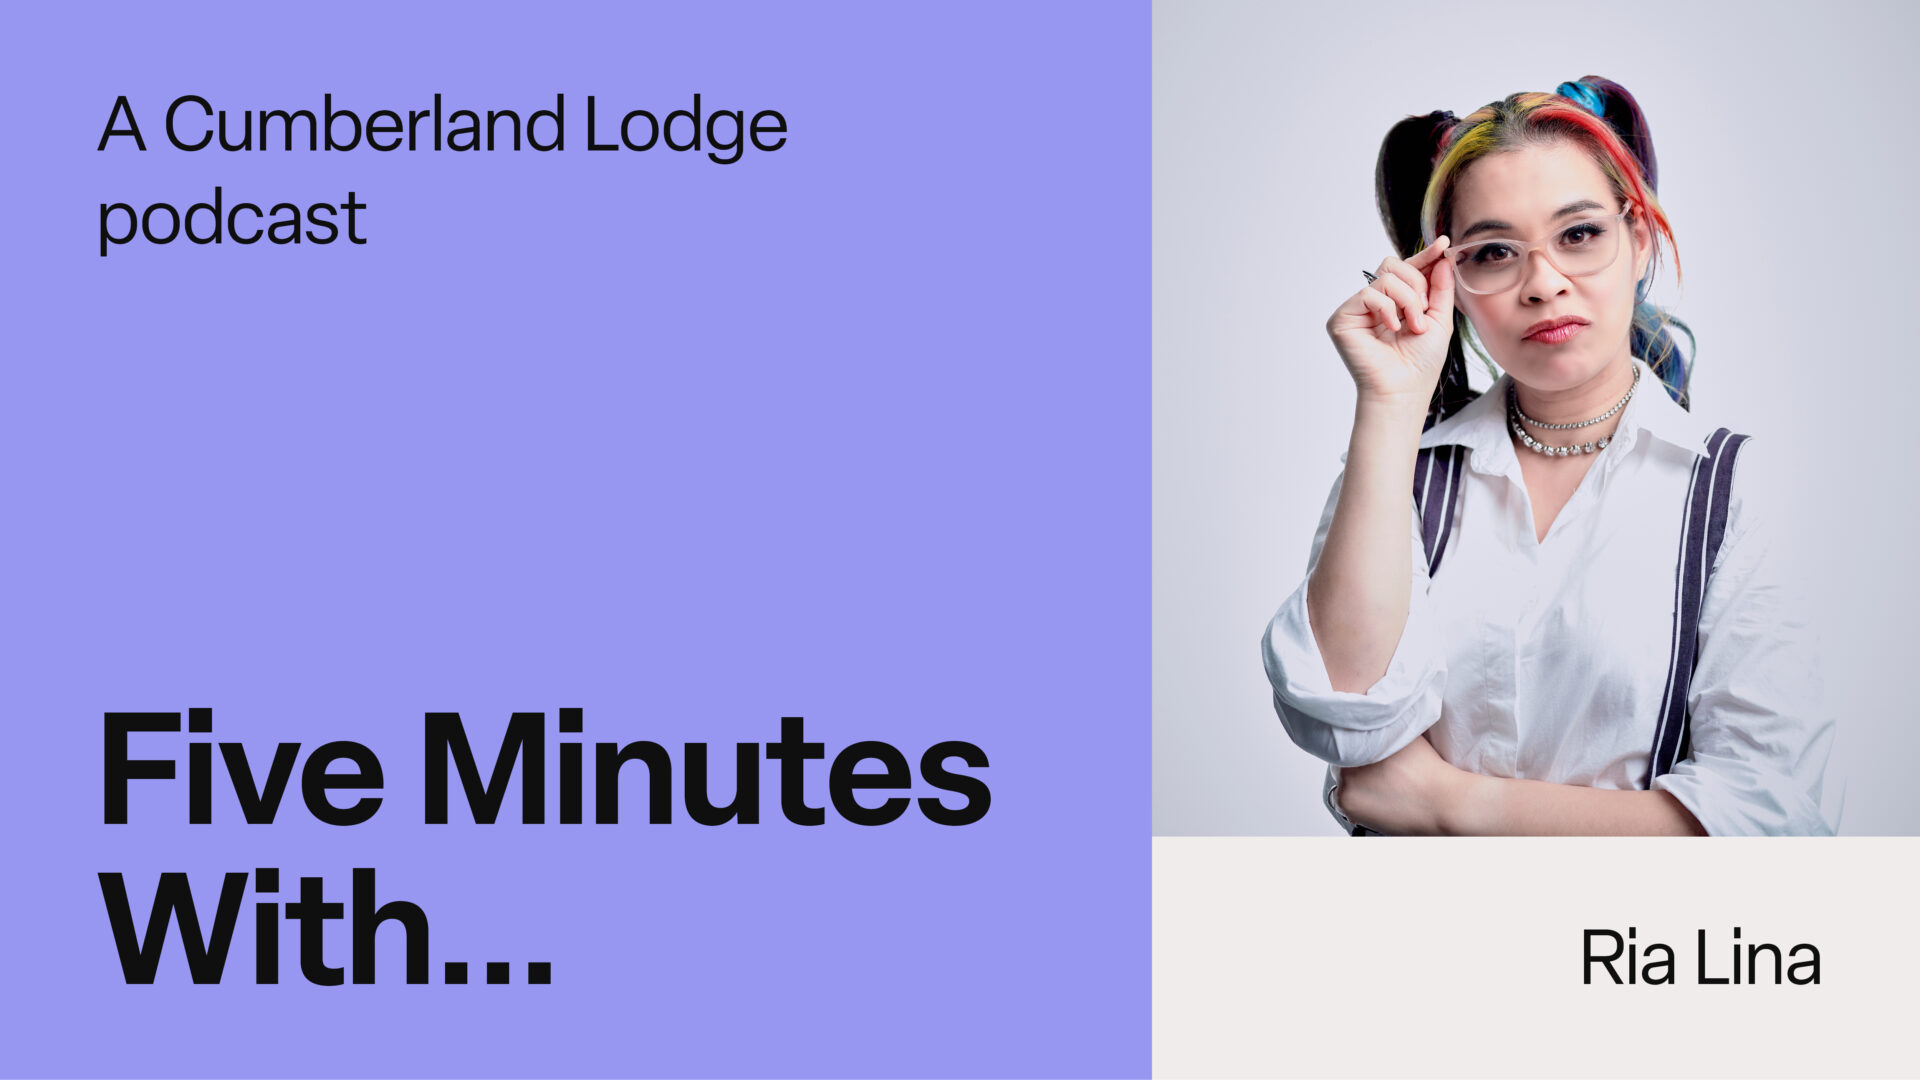 TEXT: A Cumberland Lodge podcast. Five Minutes With... Ria Lina